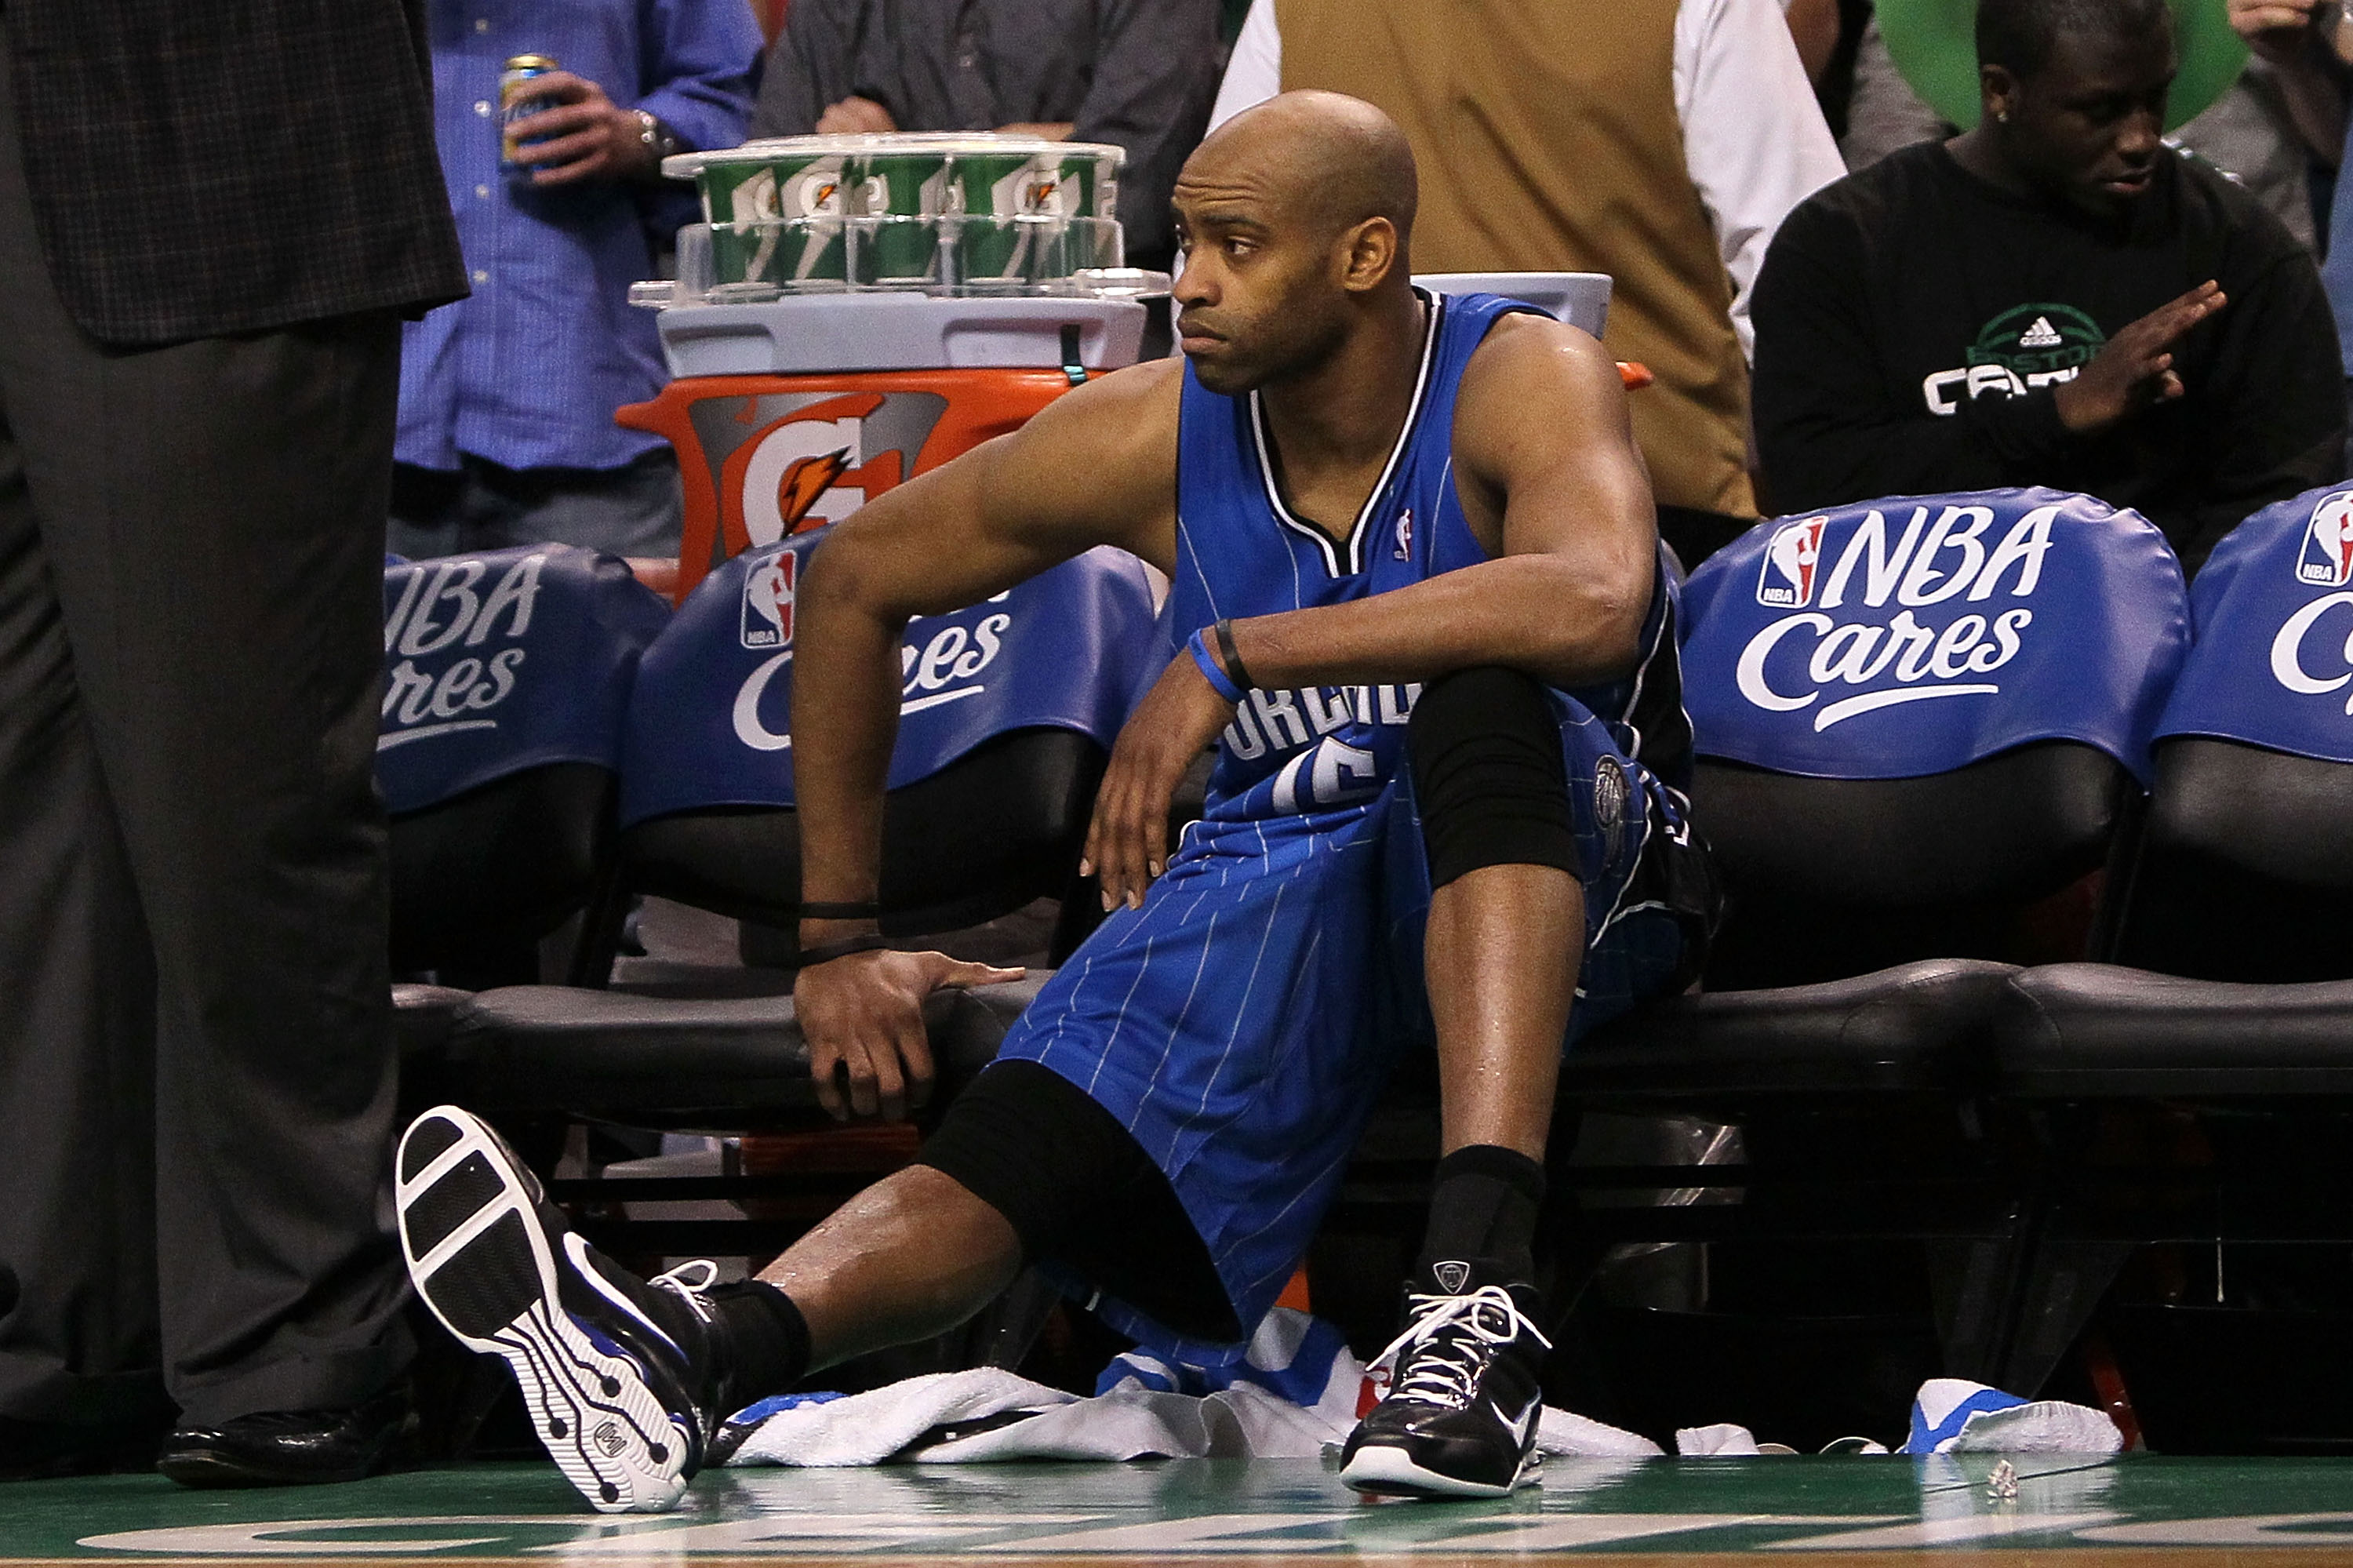 BOSTON - MAY 28:  Vince Carter #15 of the Orlando Magic looks on from the bench dejected after they lost 96-84 against the Boston Celtics in Game Six of the Eastern Conference Finals during the 2010 NBA Playoffs at TD Garden on May 28, 2010 in Boston, Mas